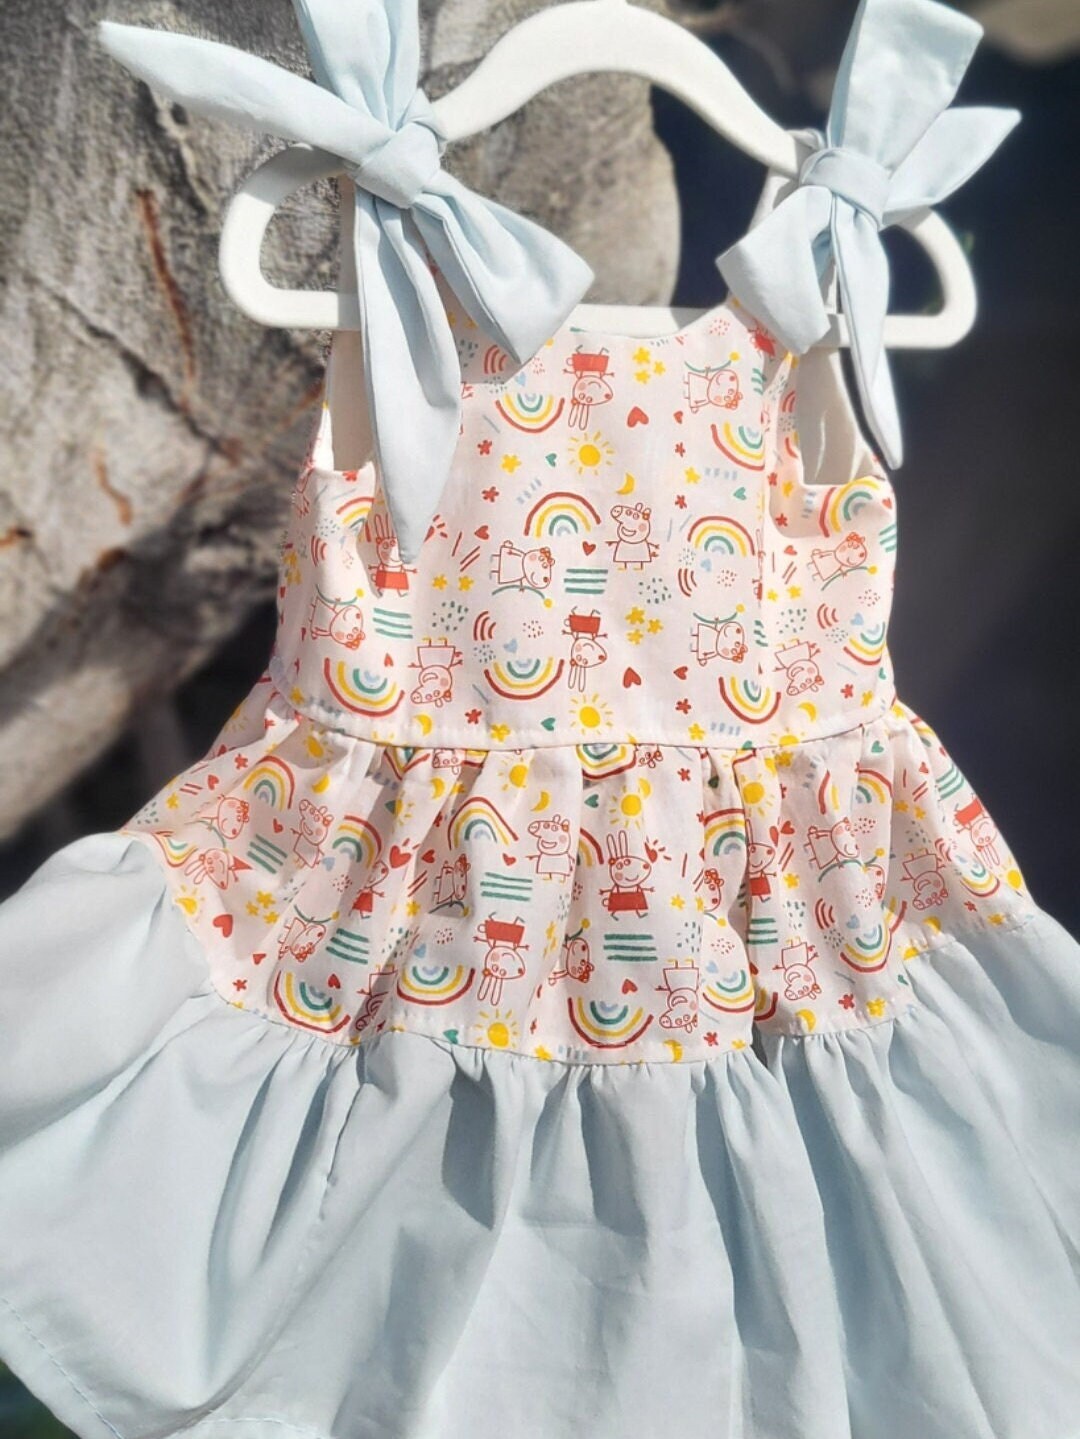 Peppa Pig Inspired Two Tier Sun Dress - Etsy